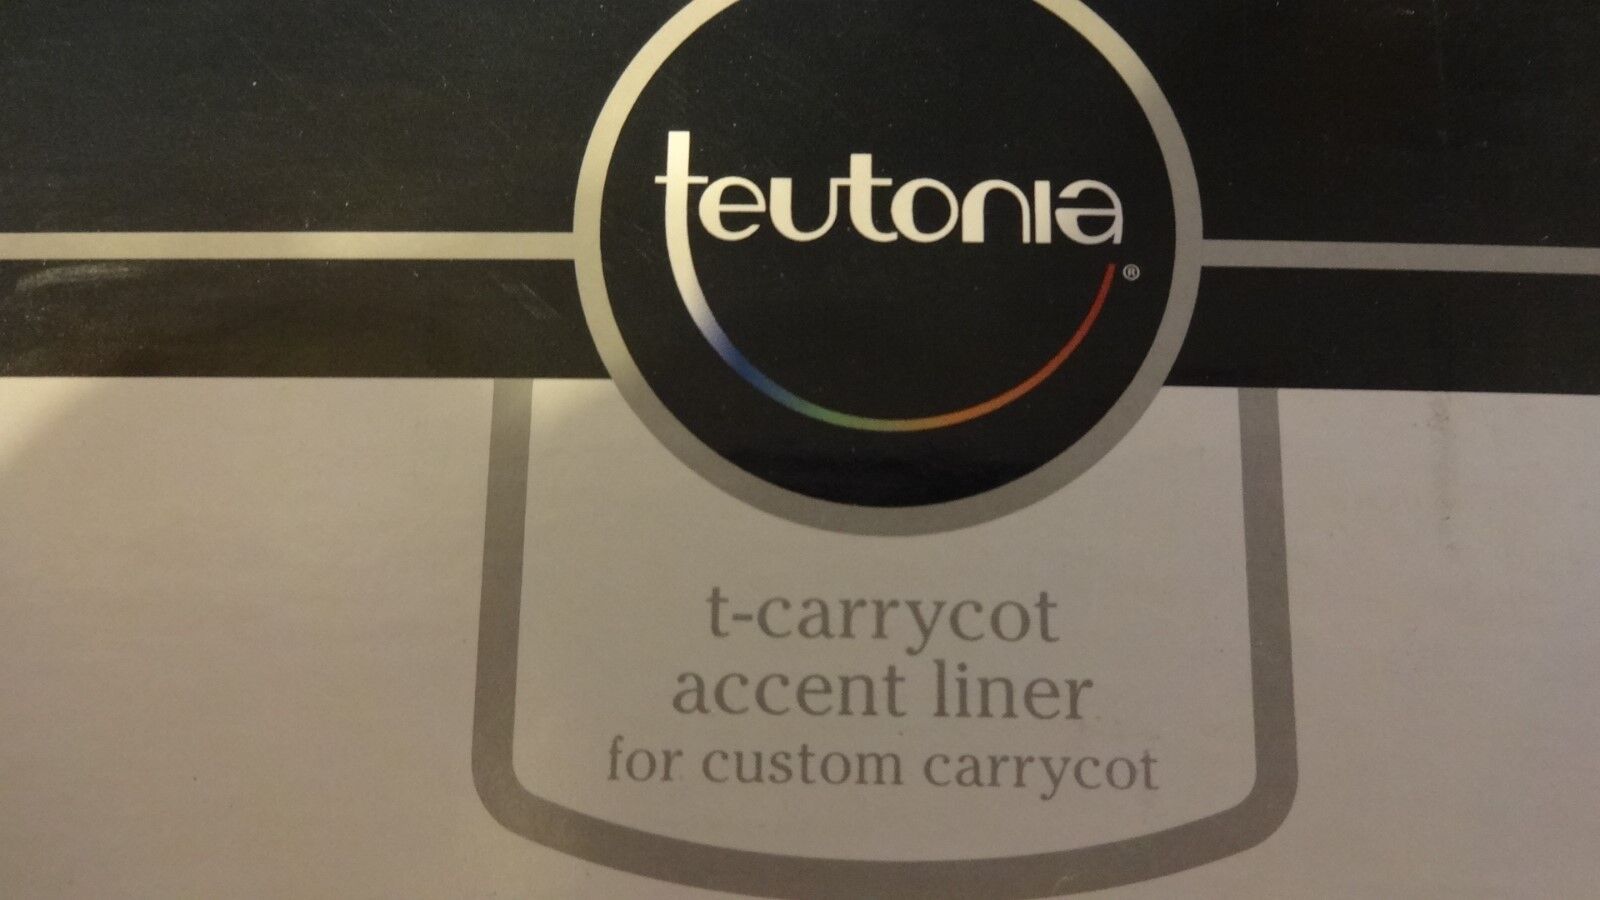 Teutonia T Carrycot Accent Liner, B2 teutonia Does Not Apply - фотография #6